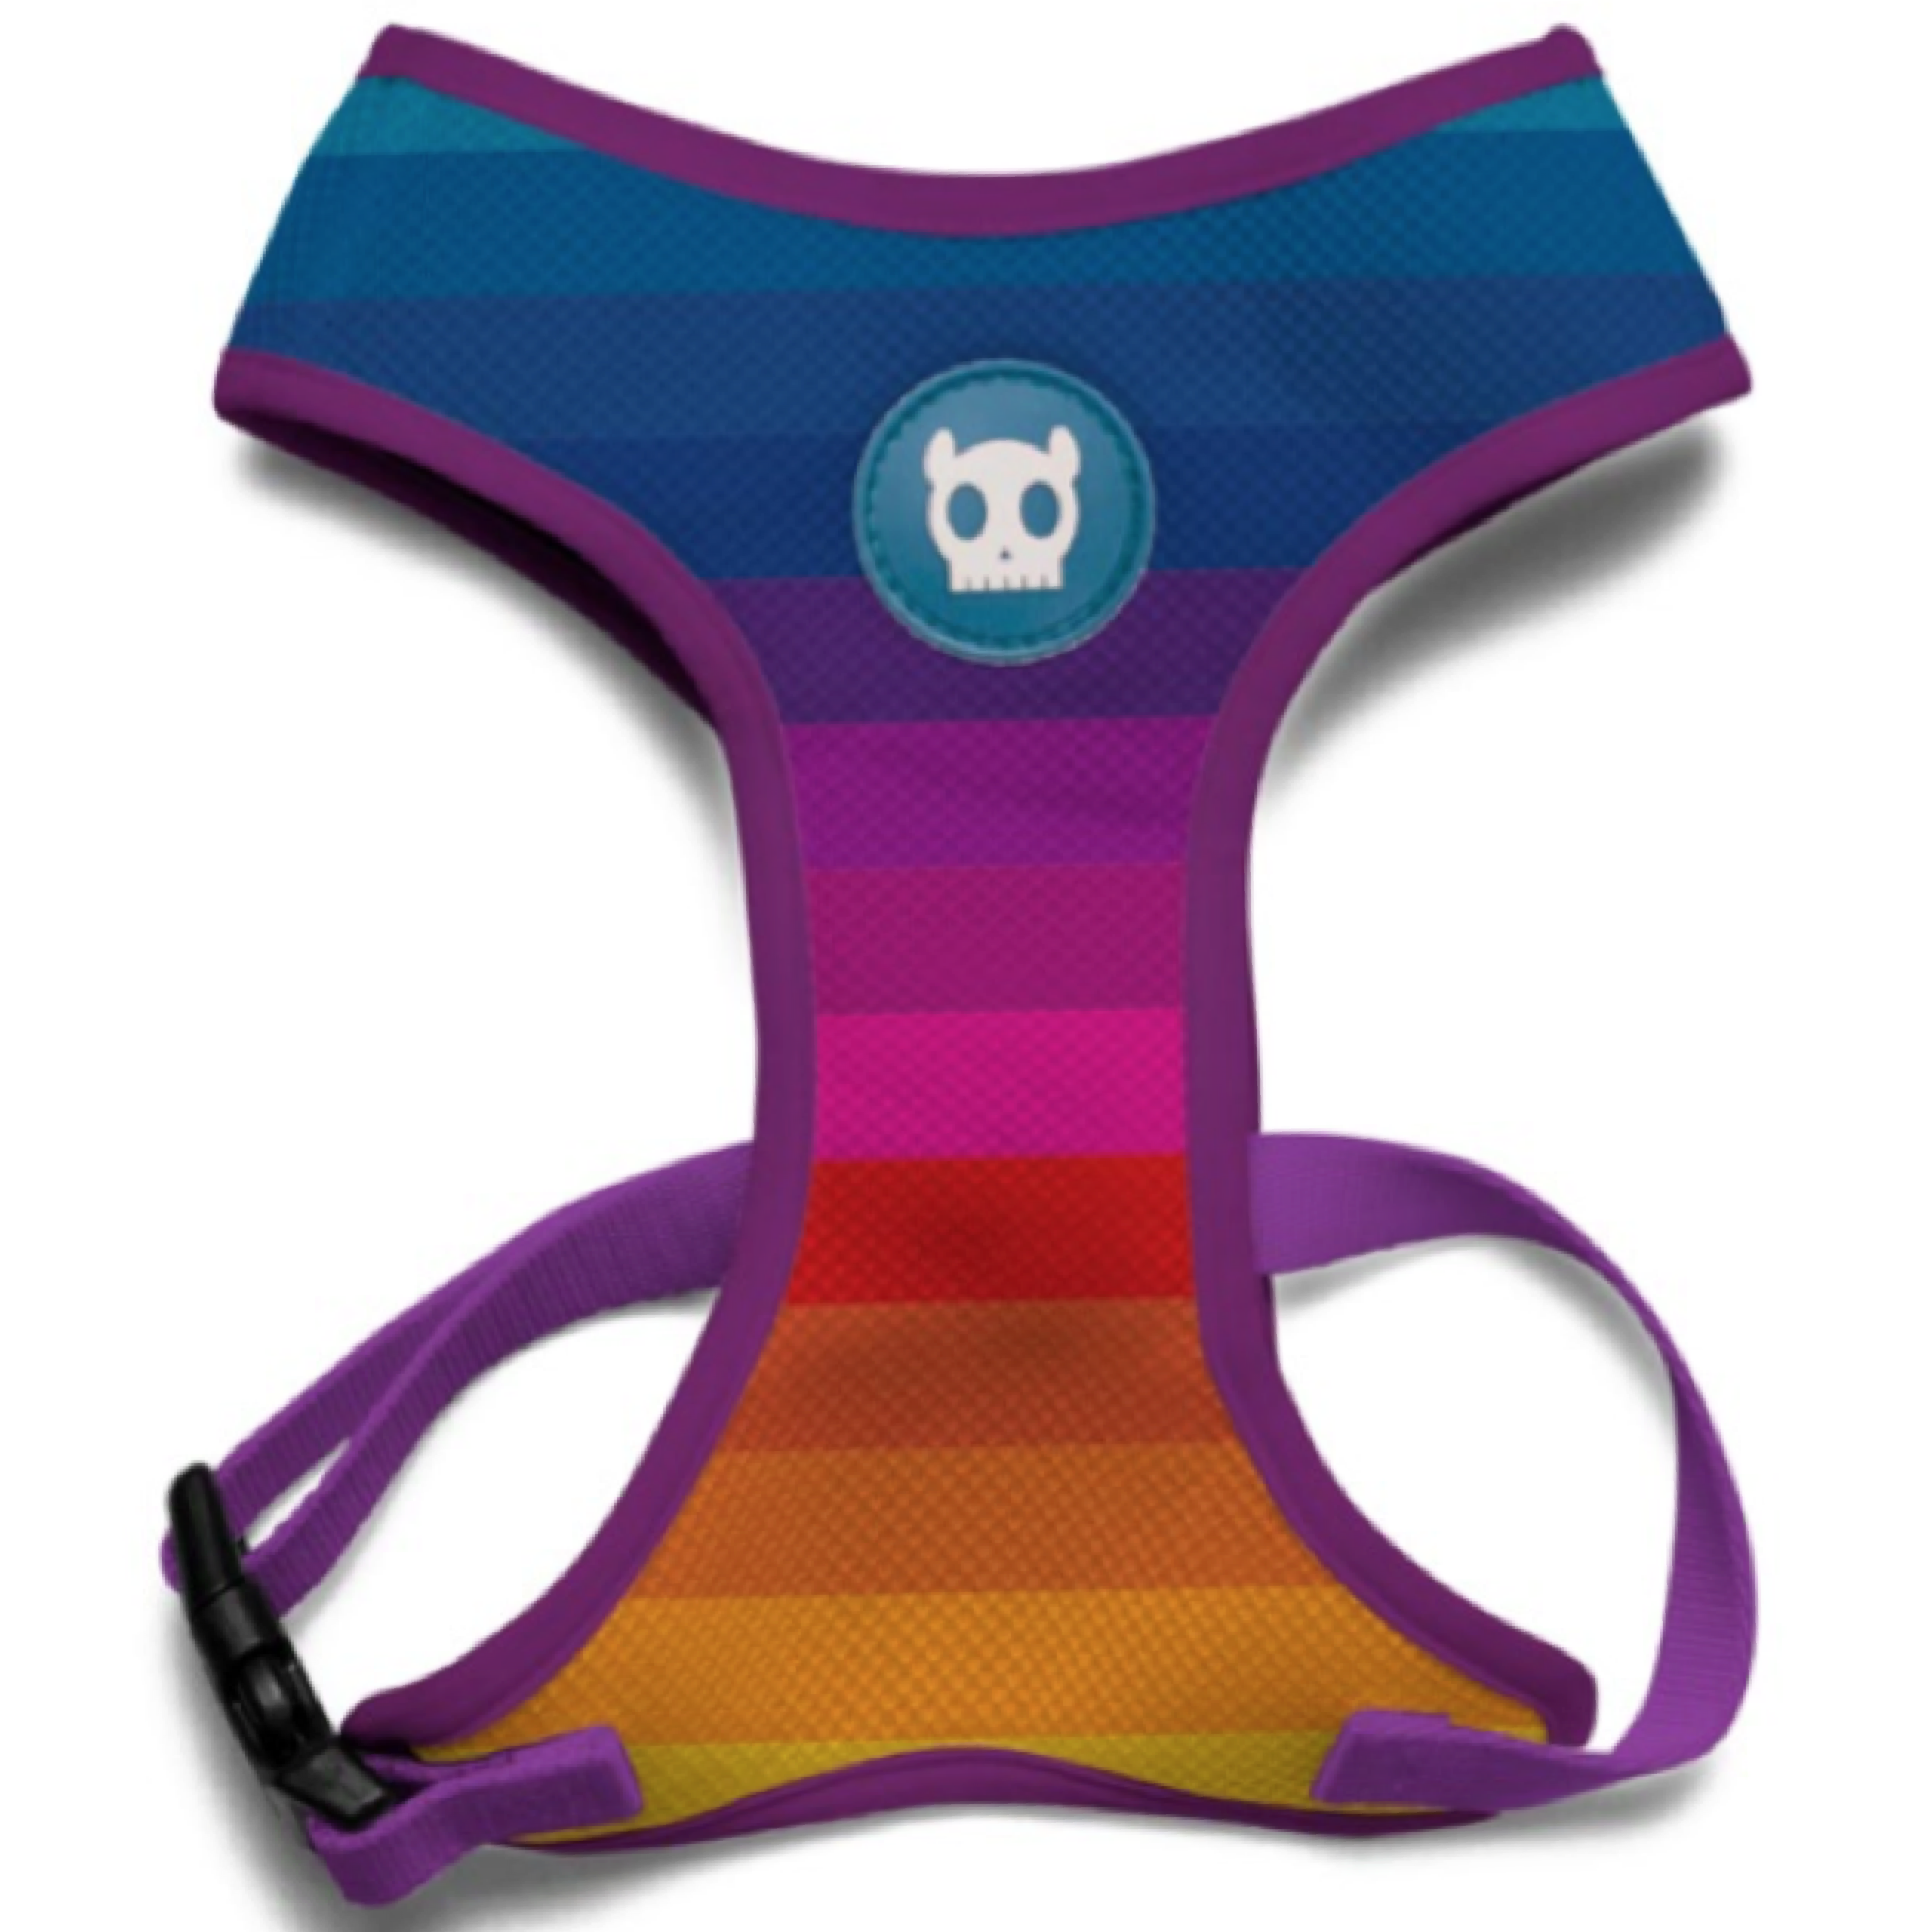  Mesh Harness Prisma | All Things Canine